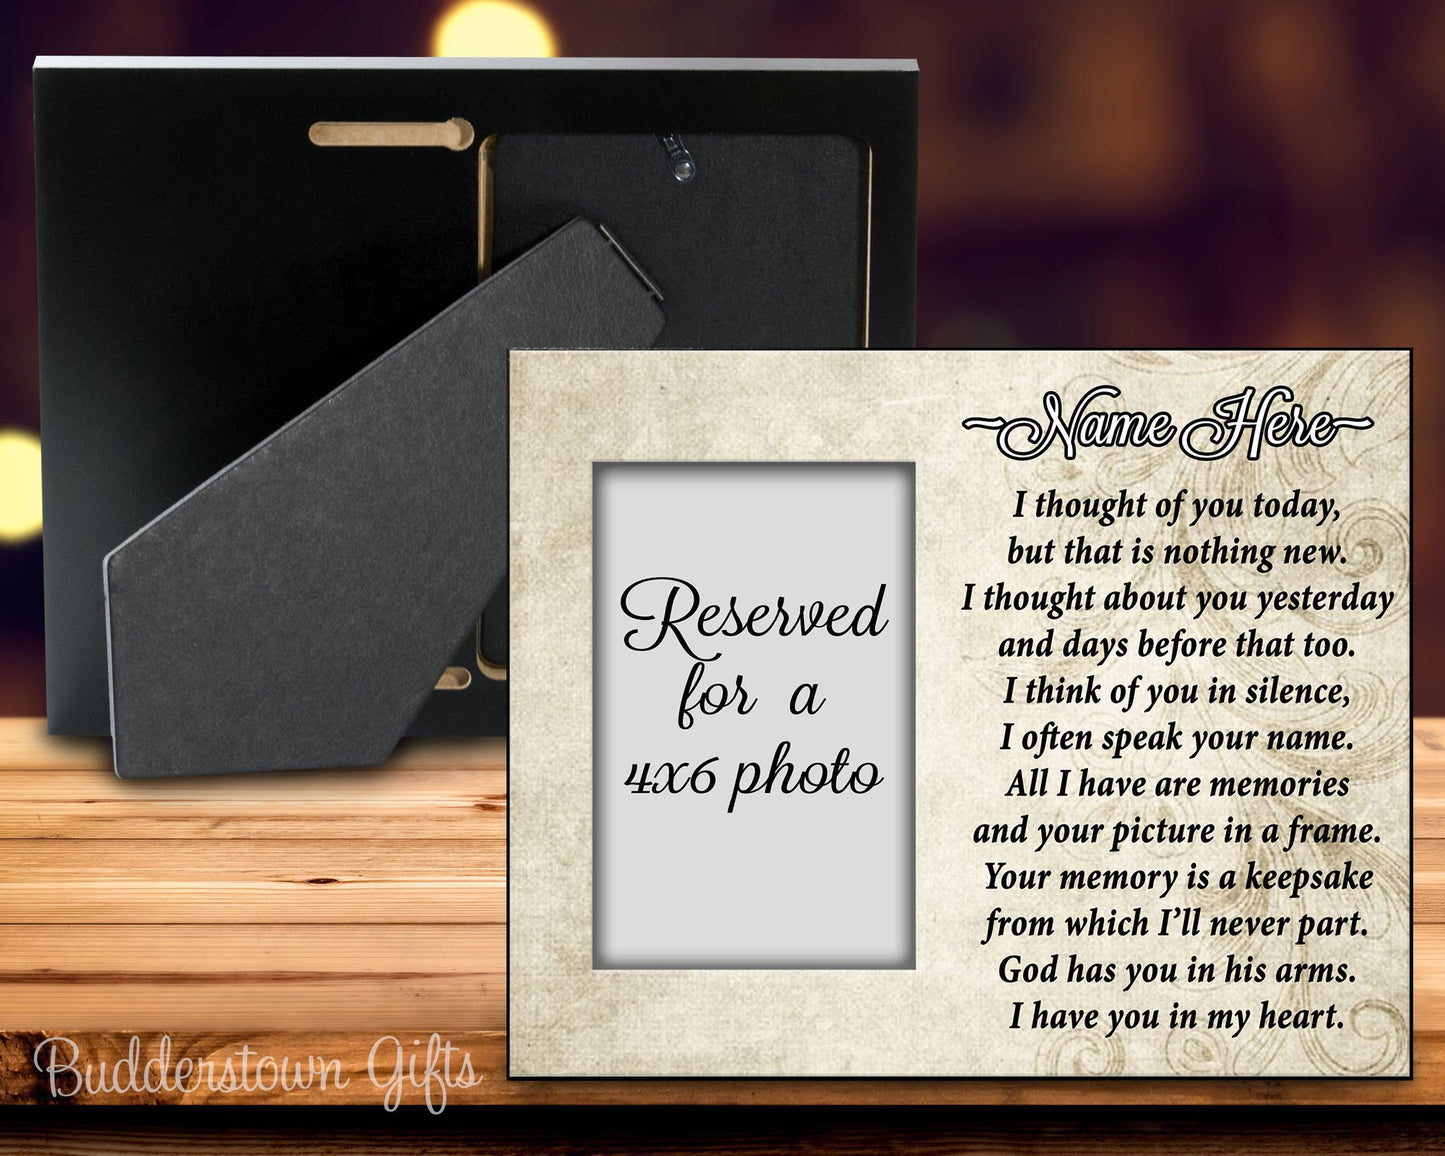 Thought of you today  - Sympathy Frame 8x10